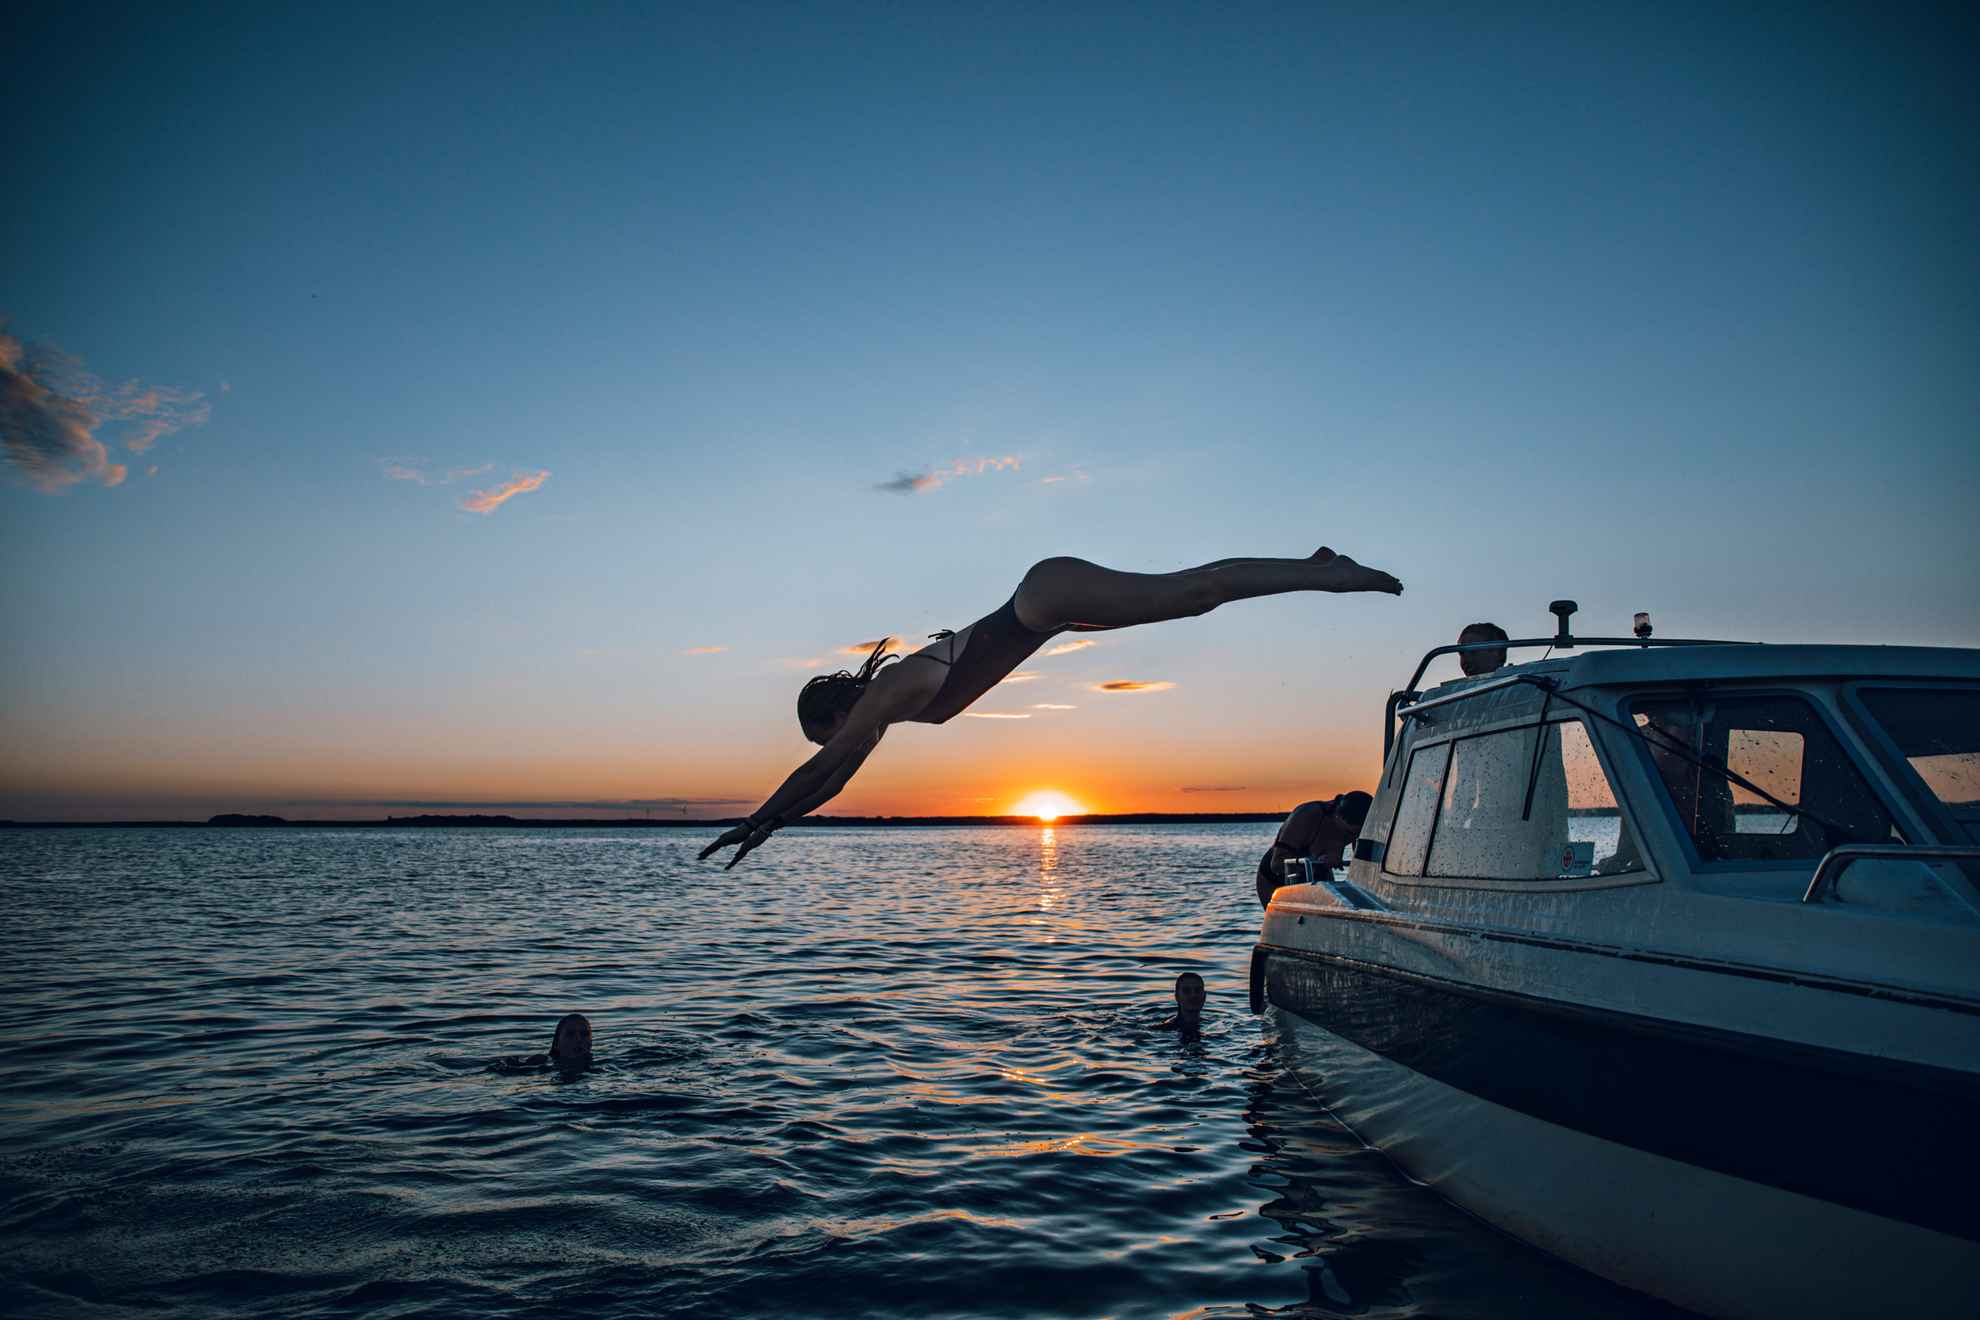 A woman is jumping from a boat in the swedish summer, and the sun is to set